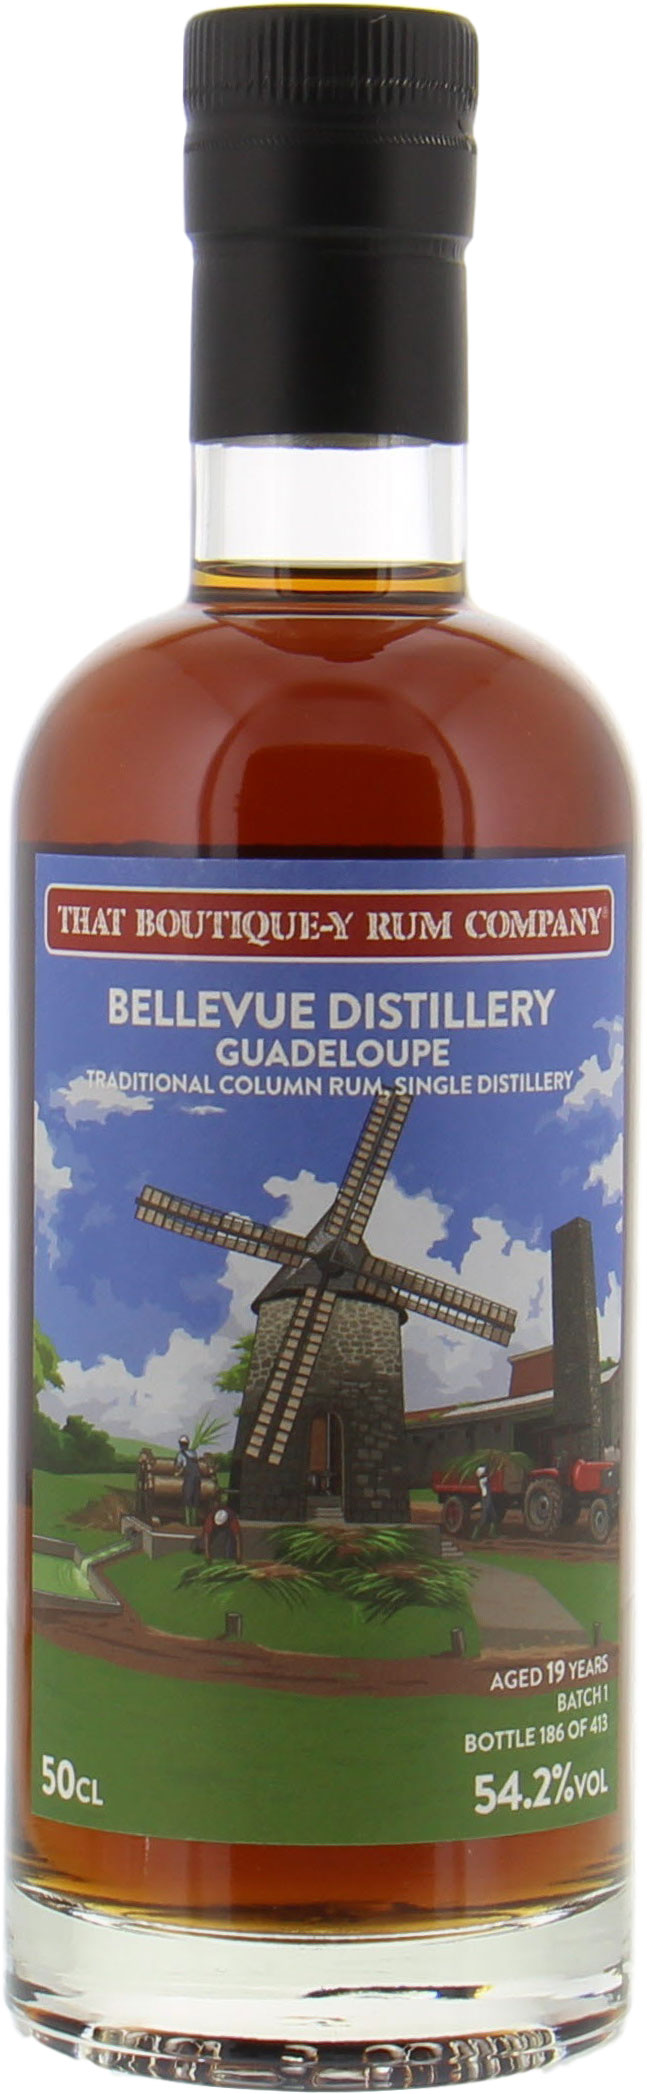 Bellevue - 19 Years Old That Boutique-y Rum Company Batch 1 54.2% NV Perfect